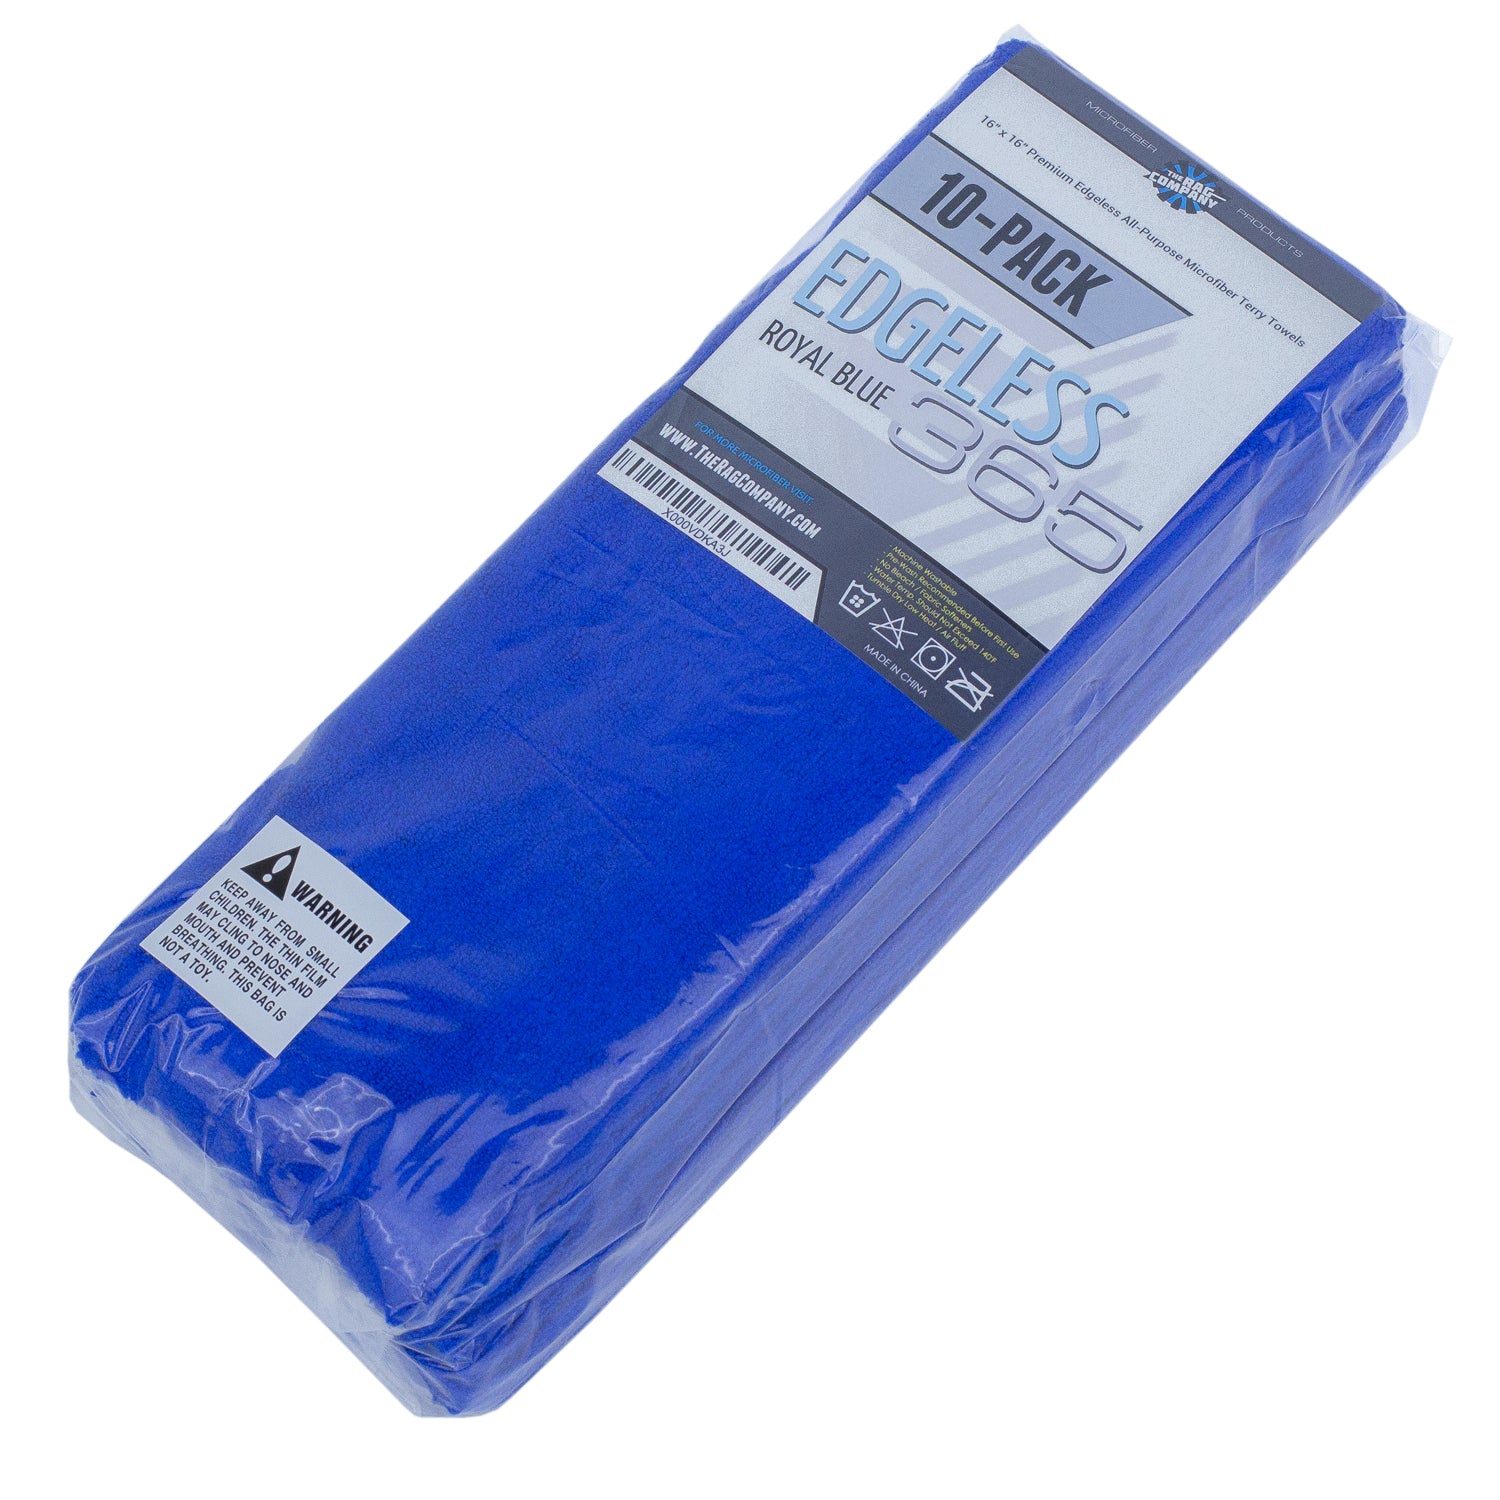 The Rag Company - Edgeless 365 - 16in. x 16in - Royal Blue